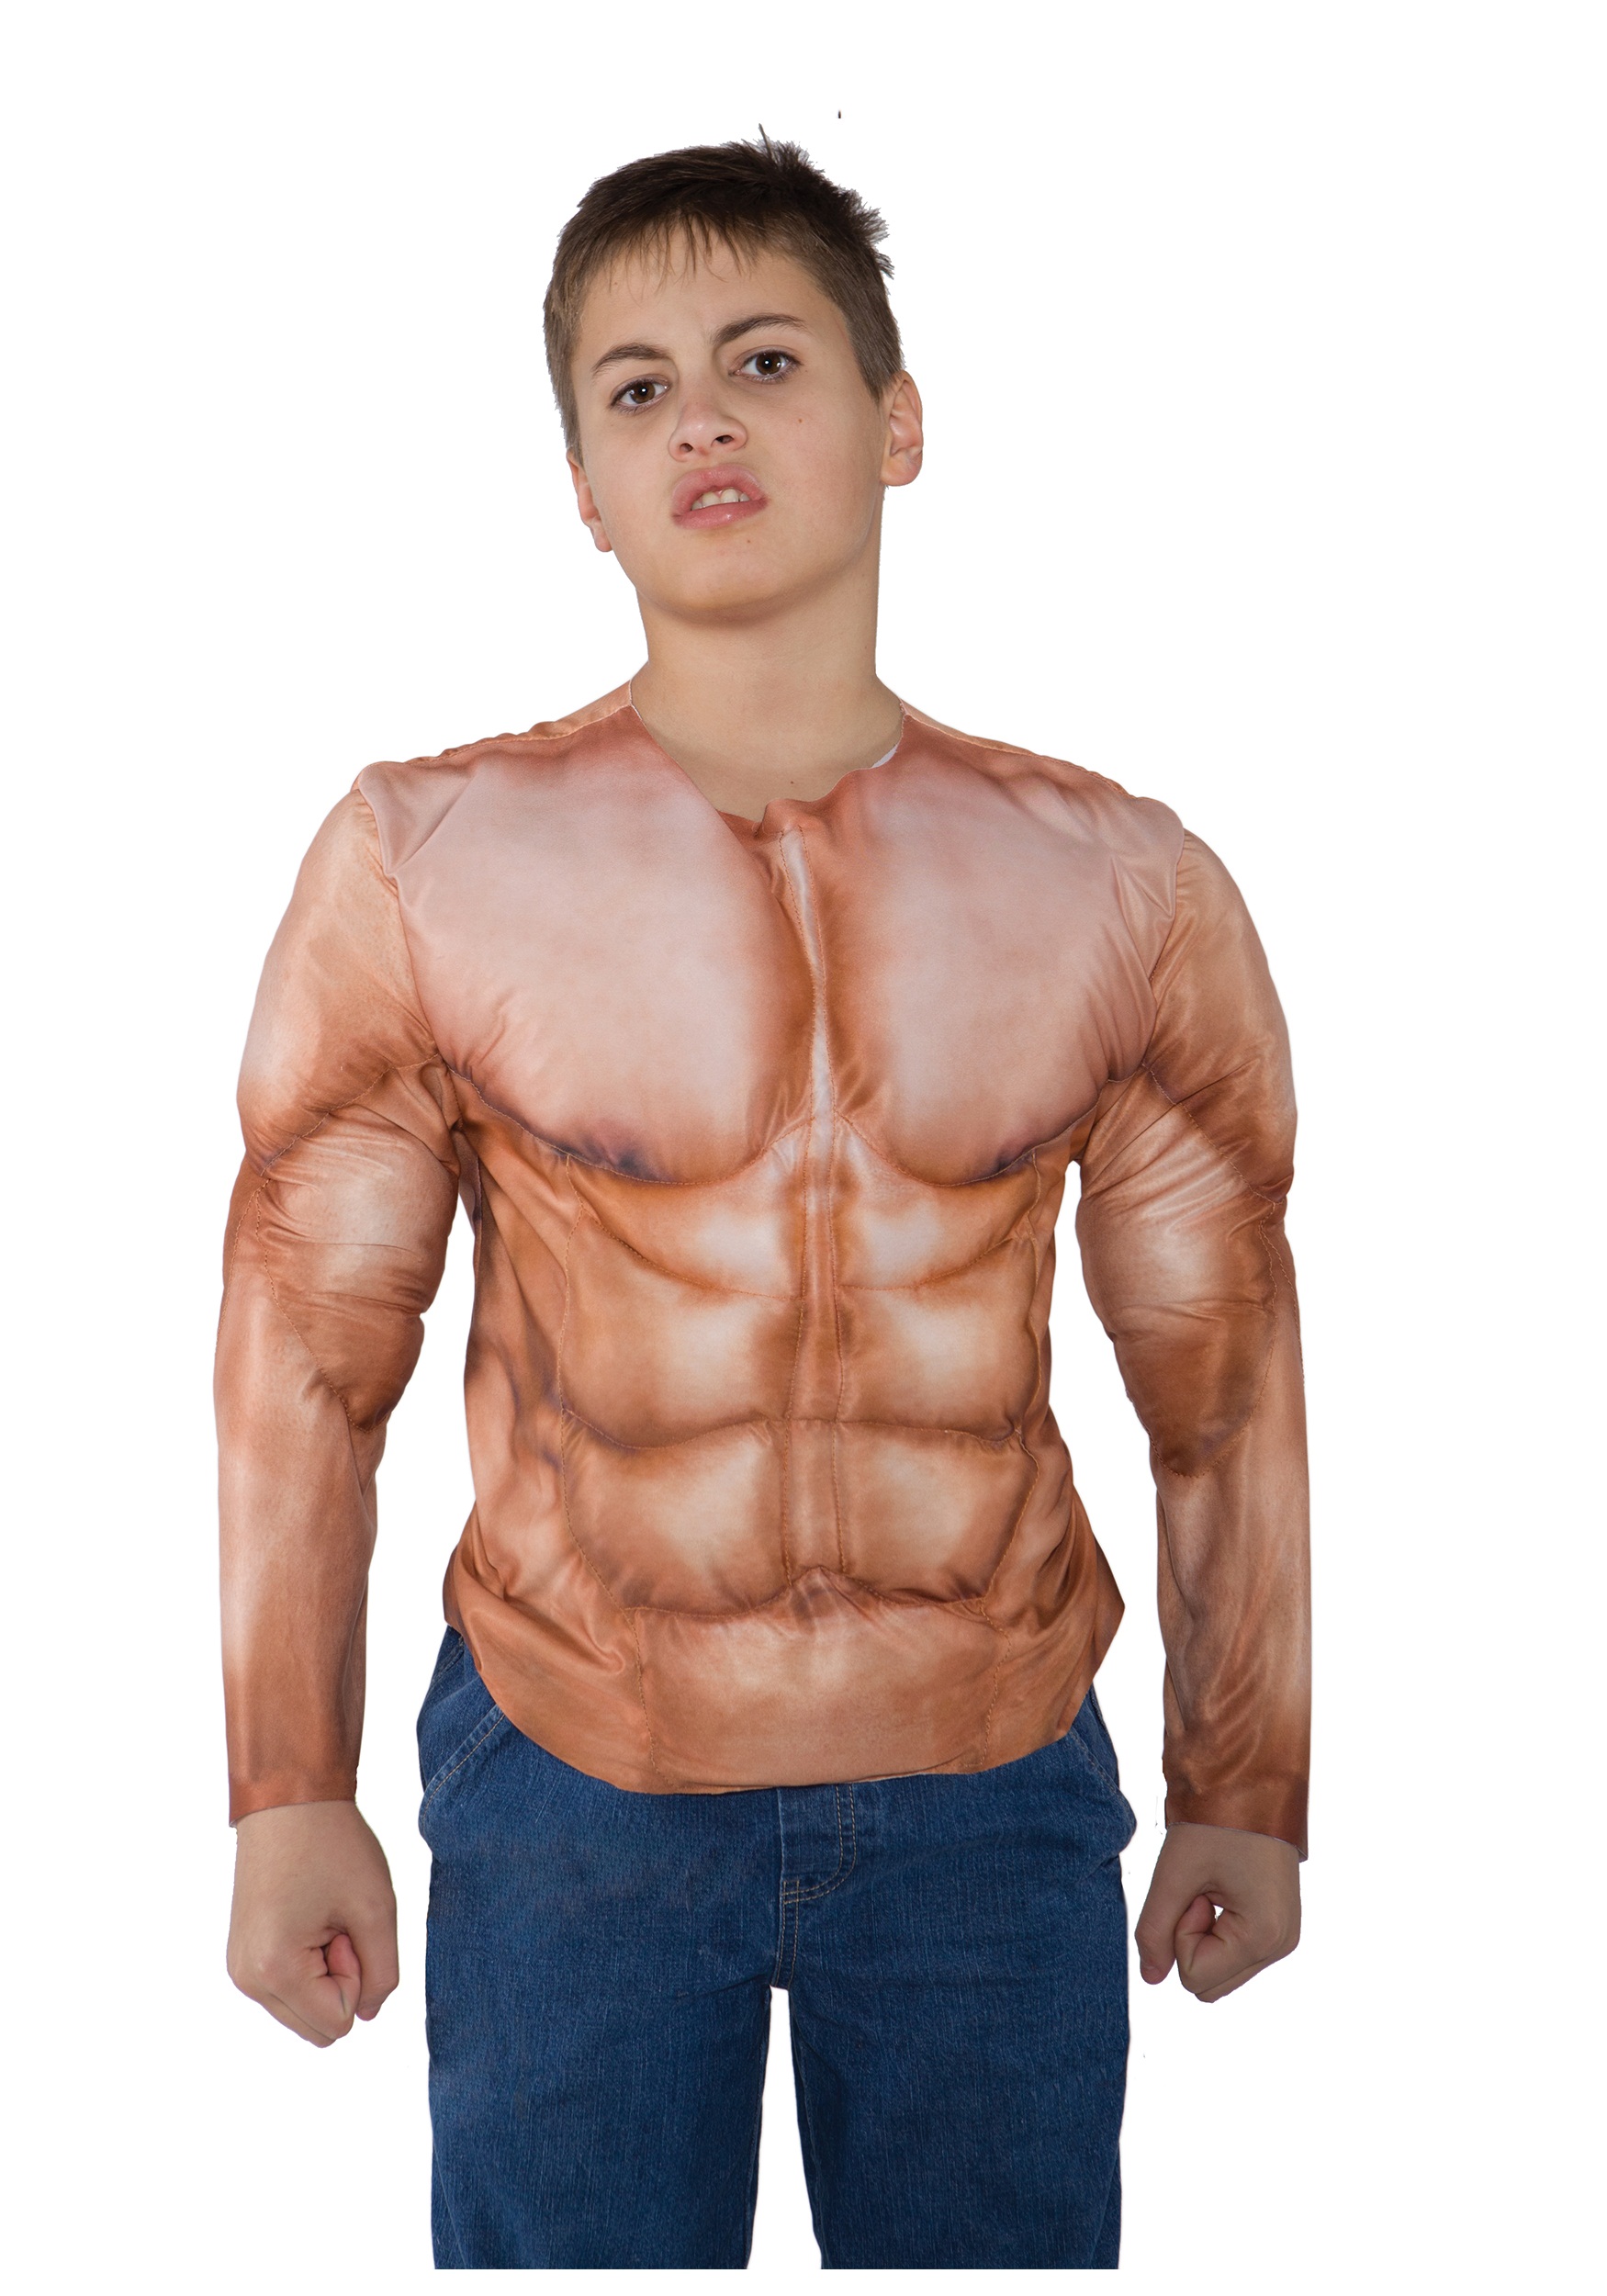 https://images.halloweencostumes.com.au/products/24273/1-1/muscles--kids.jpg